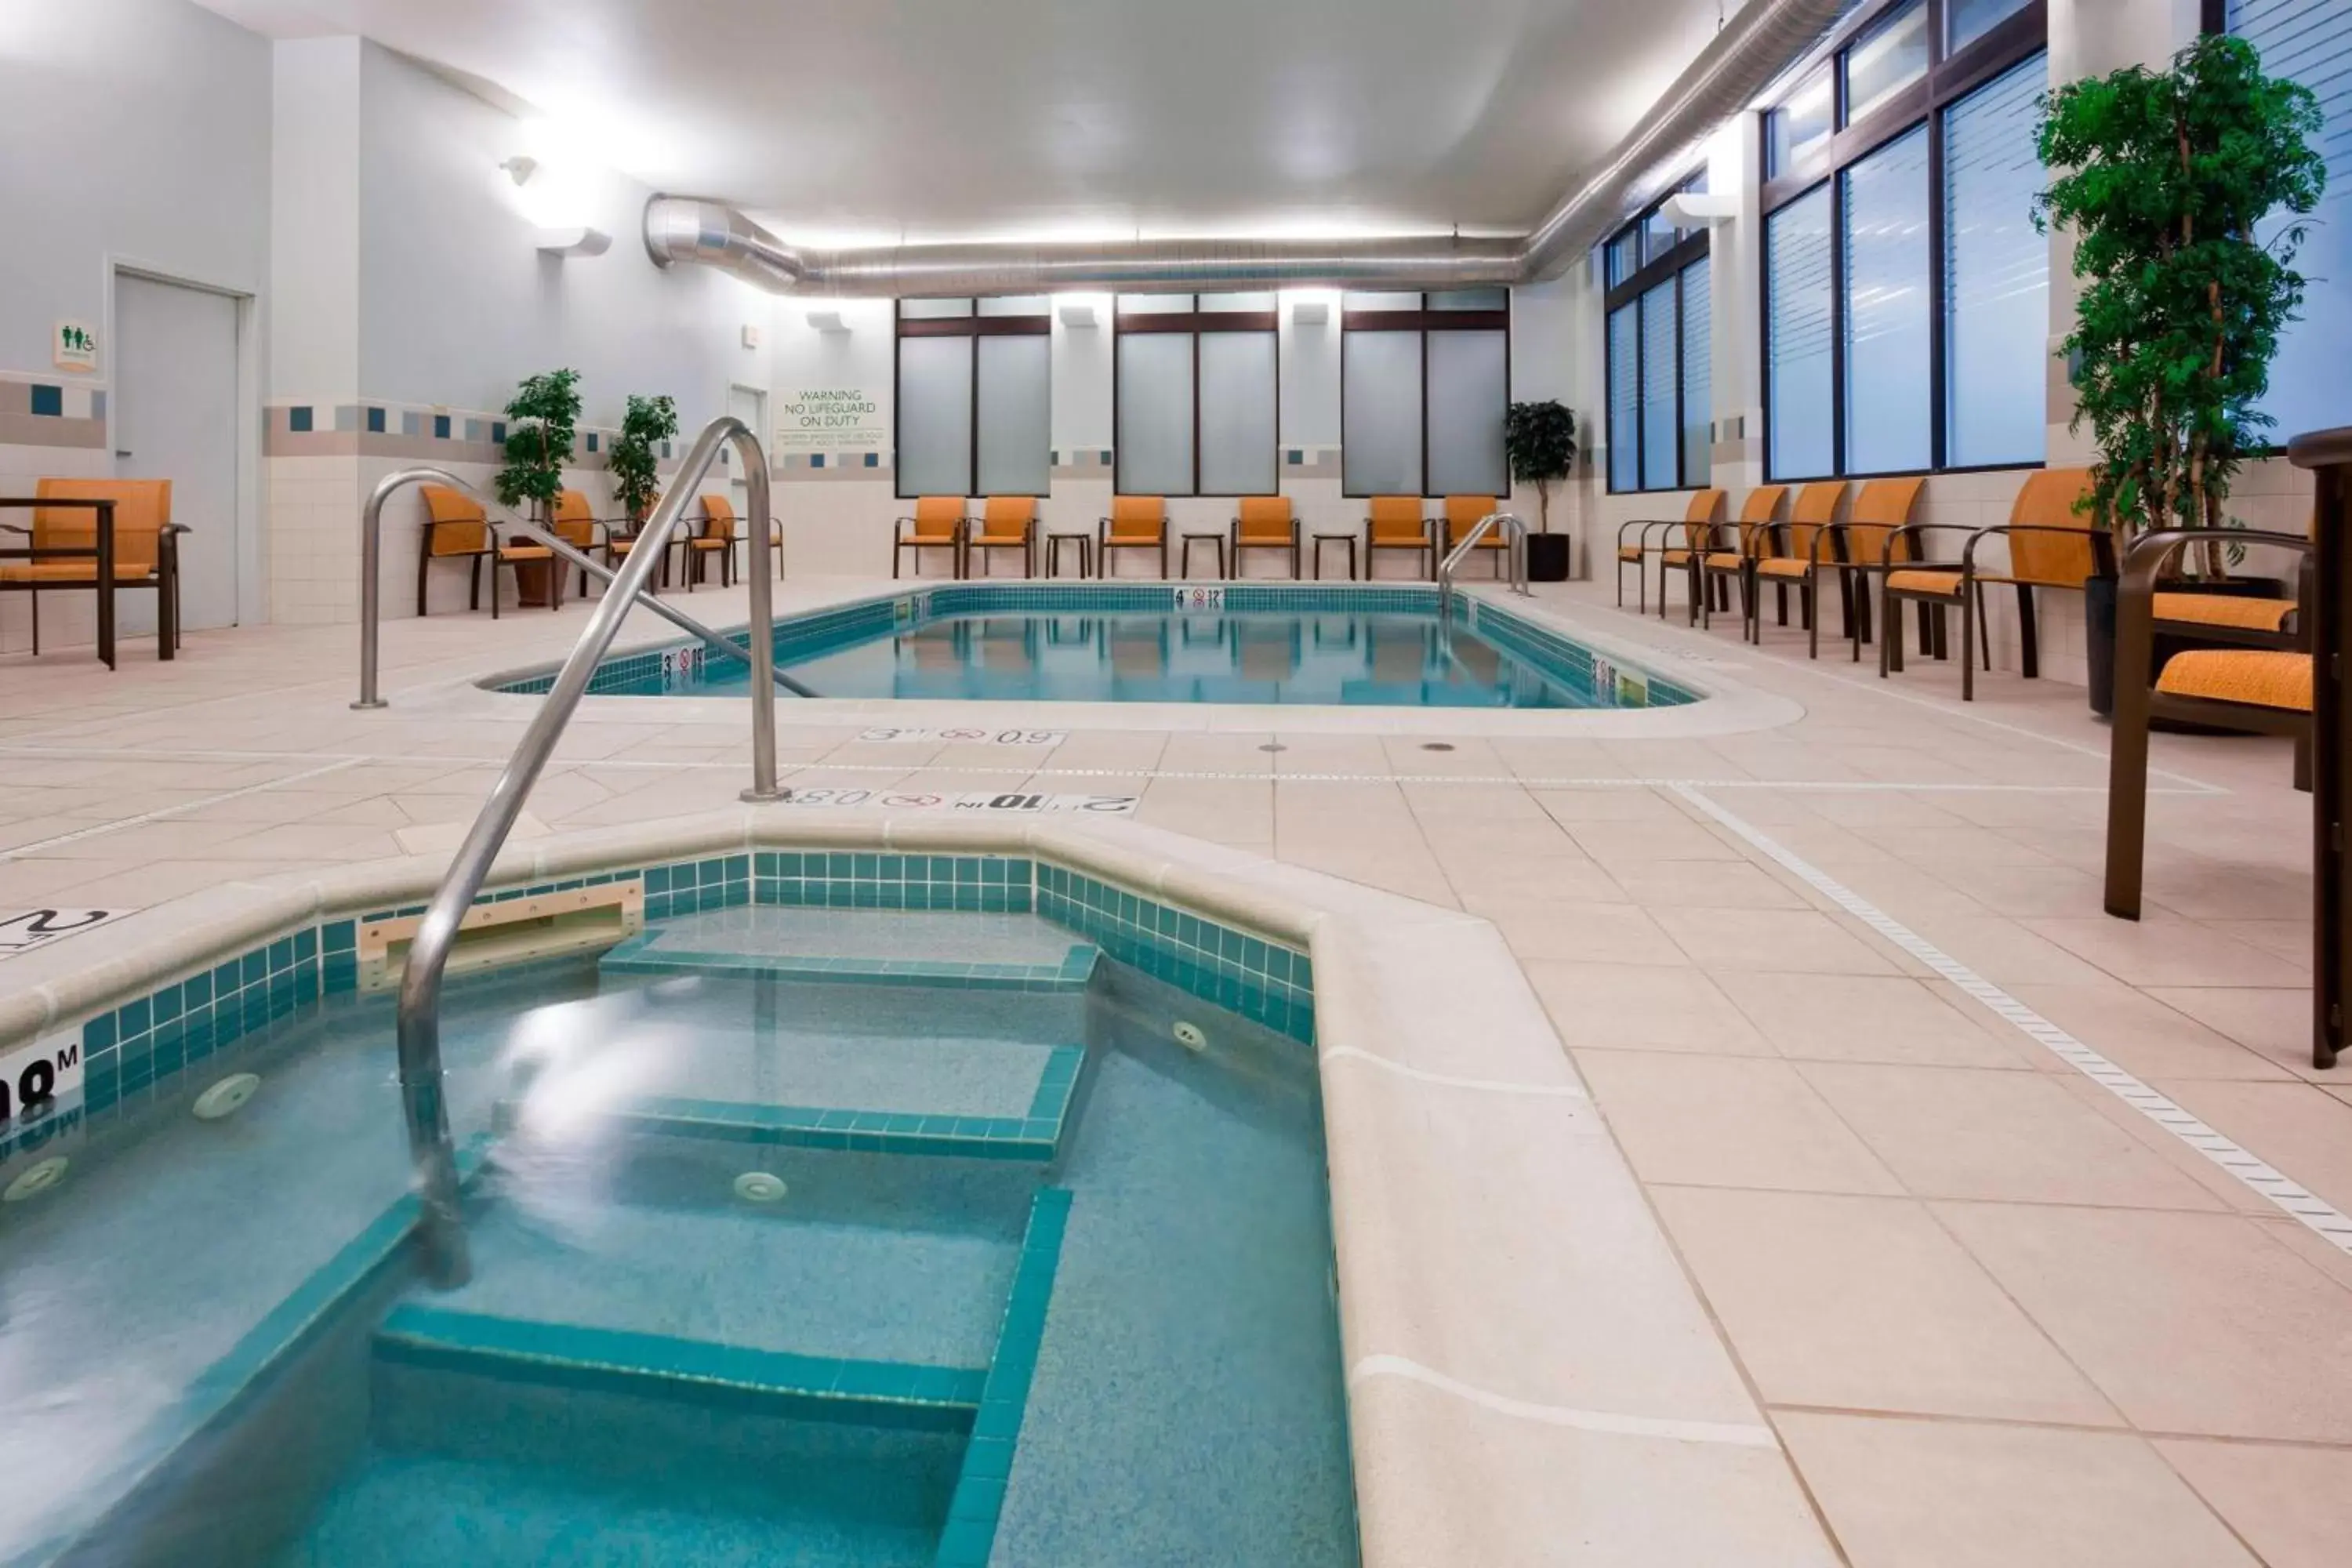 Swimming Pool in Courtyard Rochester Mayo Clinic Area/Saint Marys